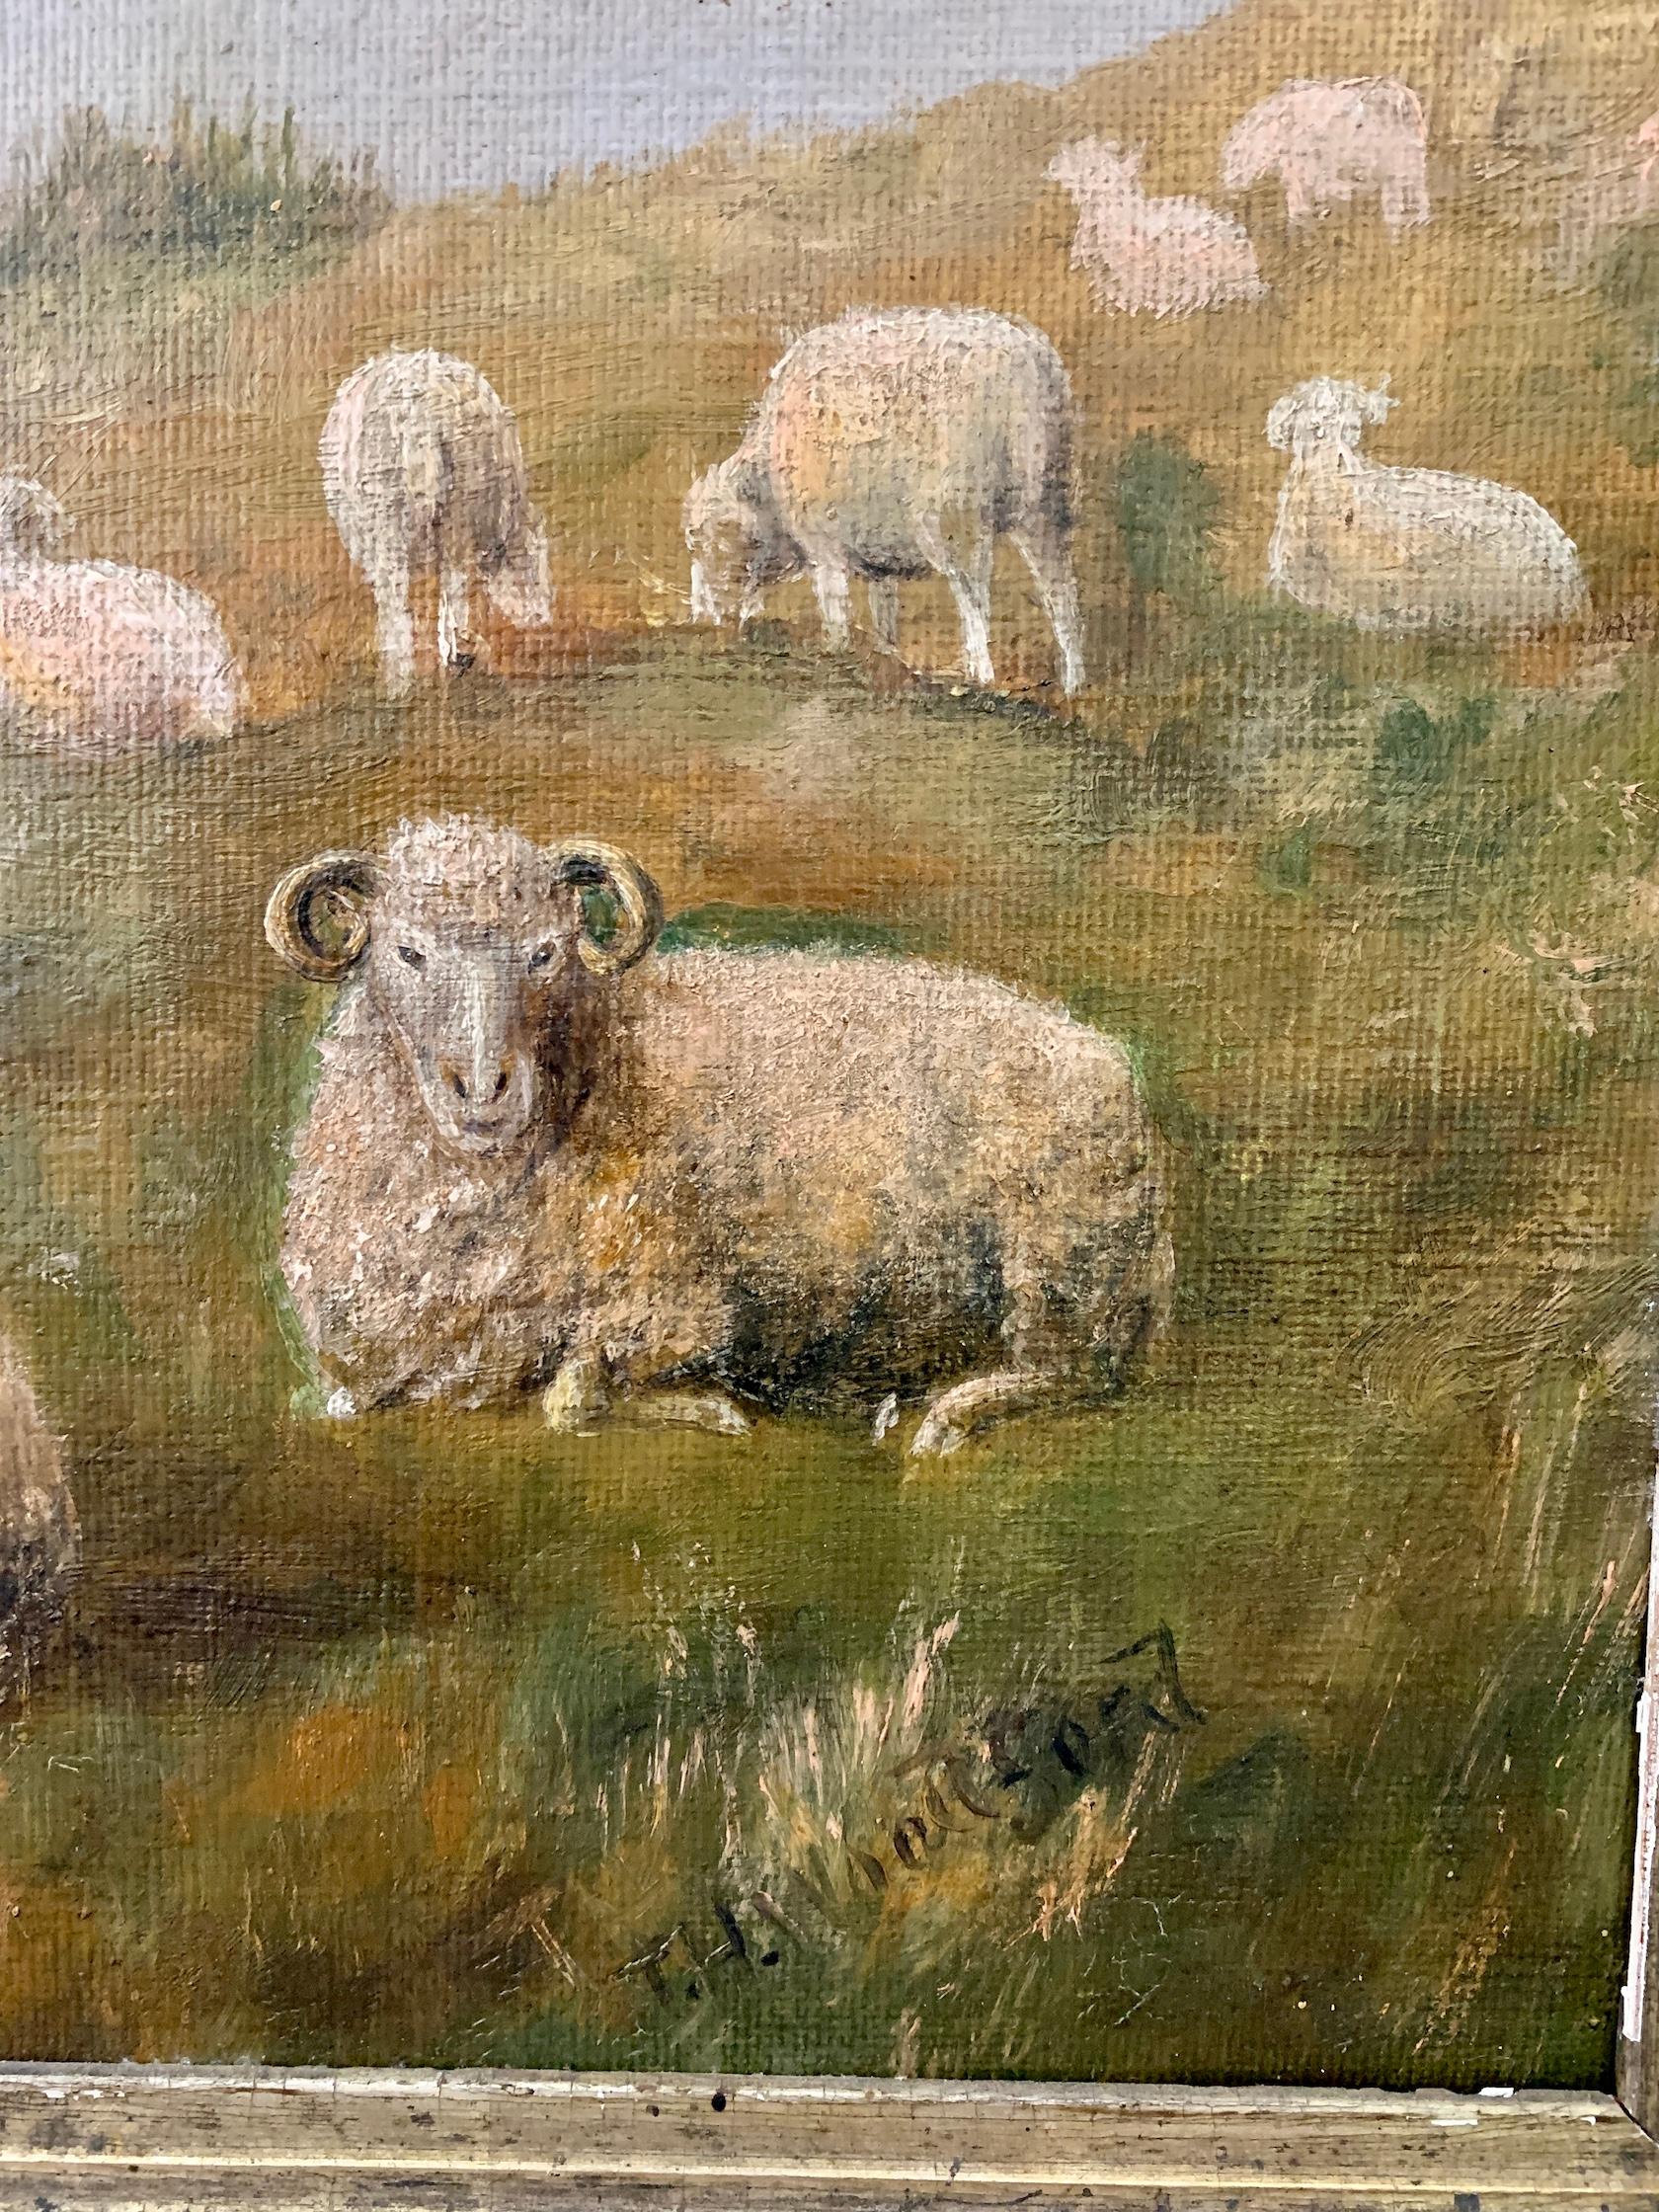 19th Century English folk art of Sheep in a landscape with a maple frame.

 English mid-19th-century folk art painting. The style was very popular from 1820-1880 and many great folk paintings were painted during this period. This is a very nice